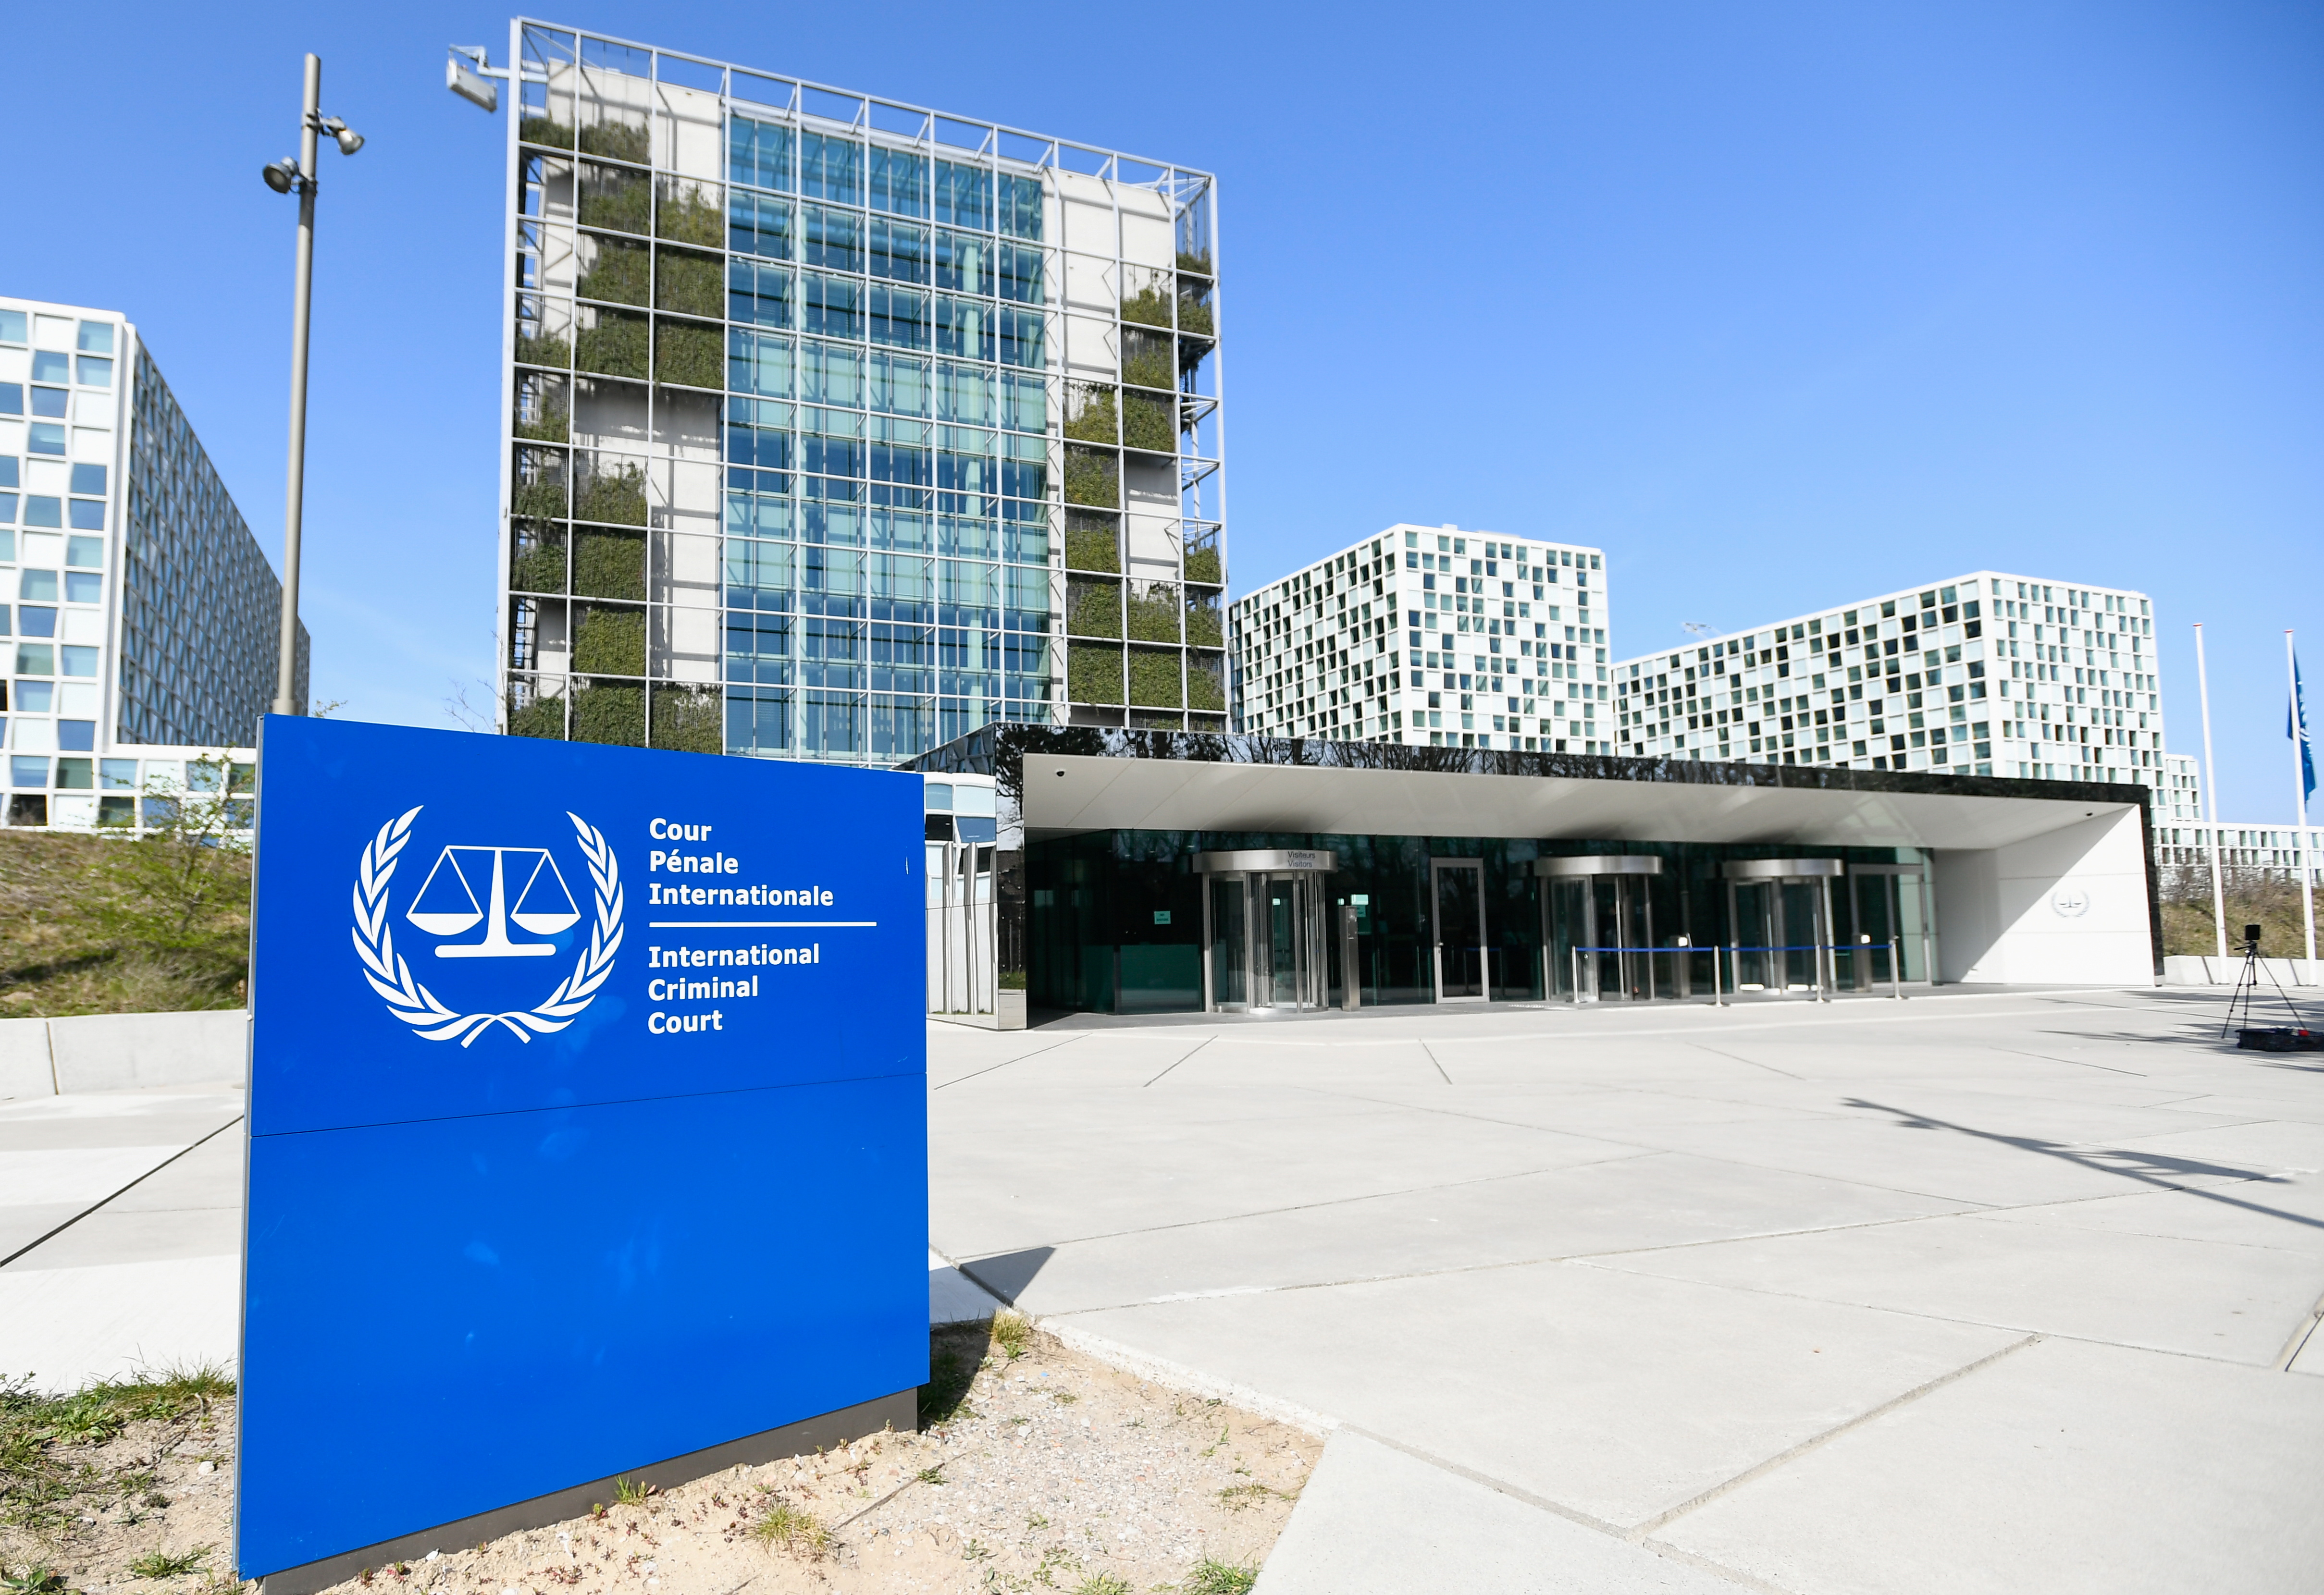 ICC ruling on former Ivory Coast President Gbagbo and former Youth Minister Ble Goude in the Hague